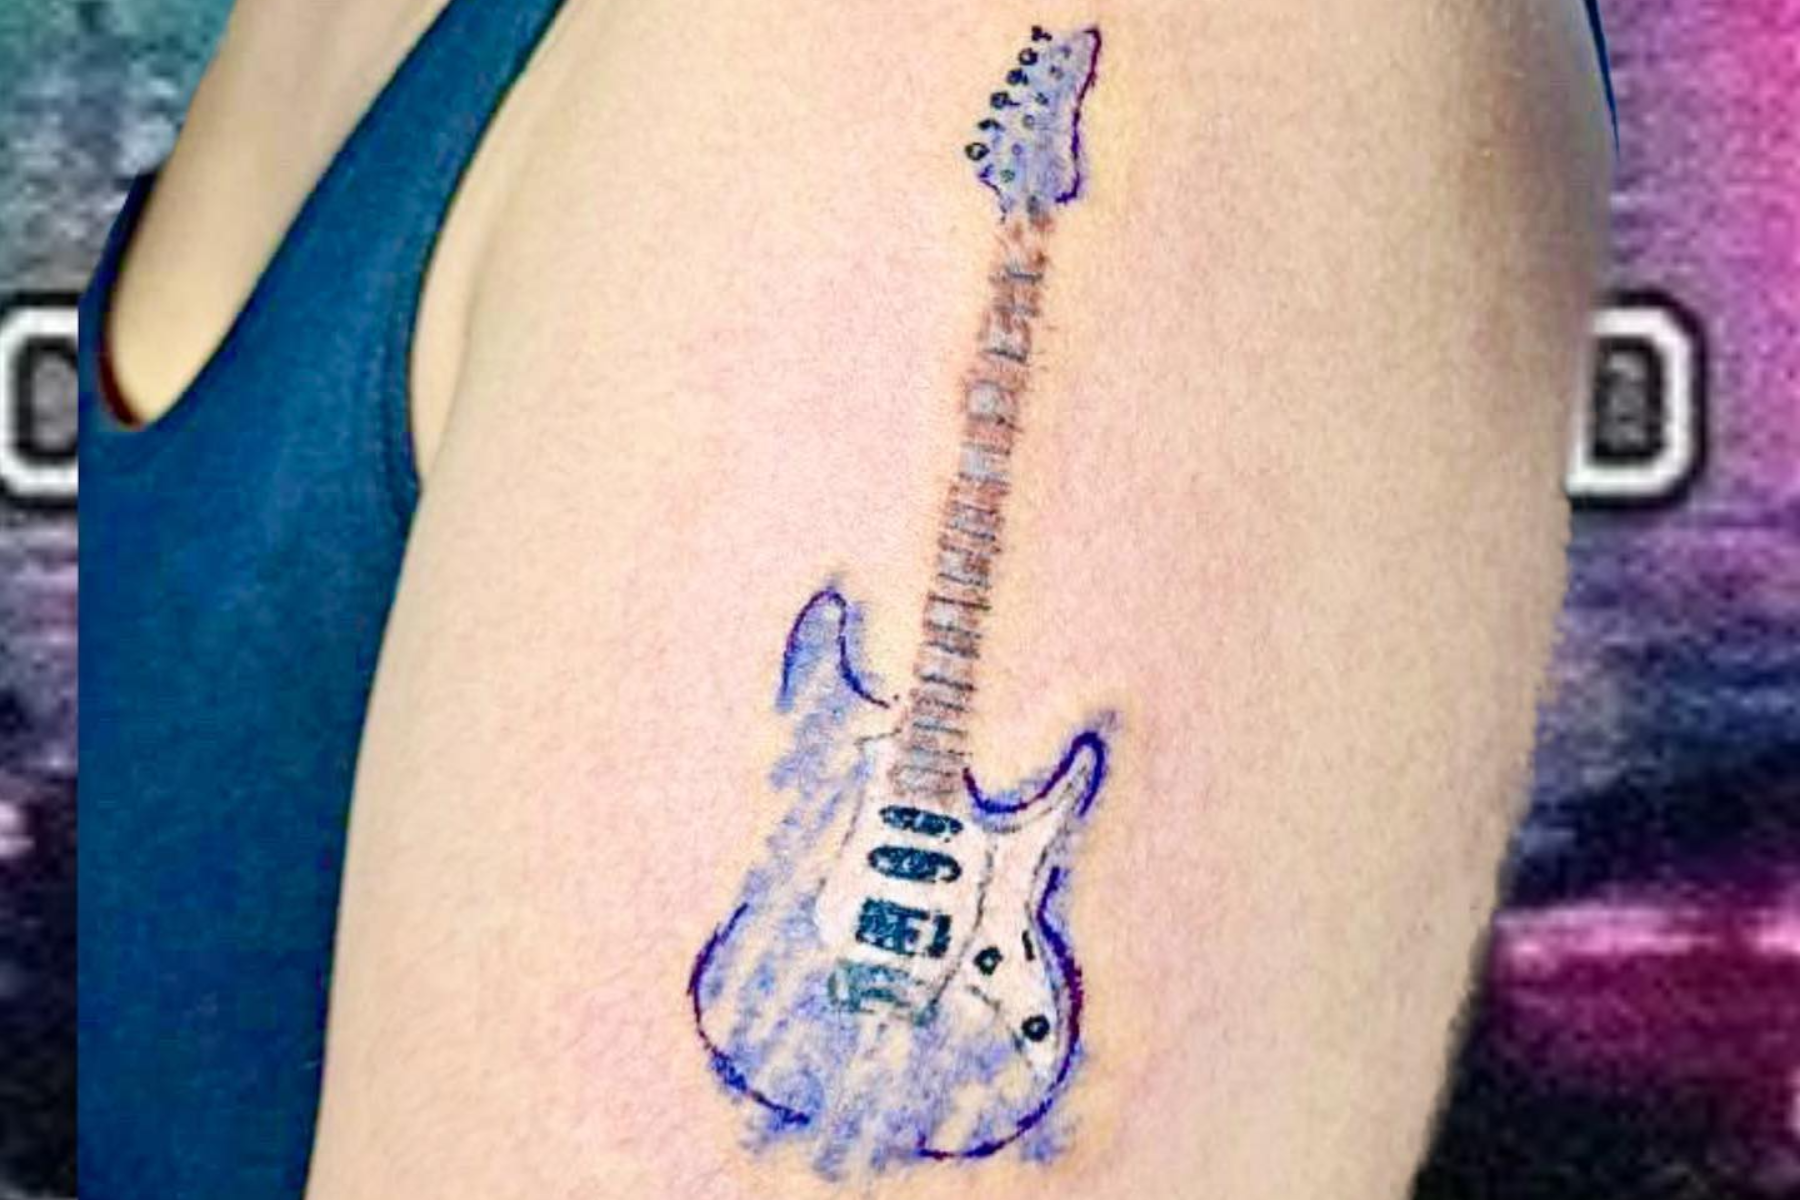 Got a new tattoo. Now I can a play solo over any and all chord progressions  and genres without feeling lost. : r/guitarcirclejerk